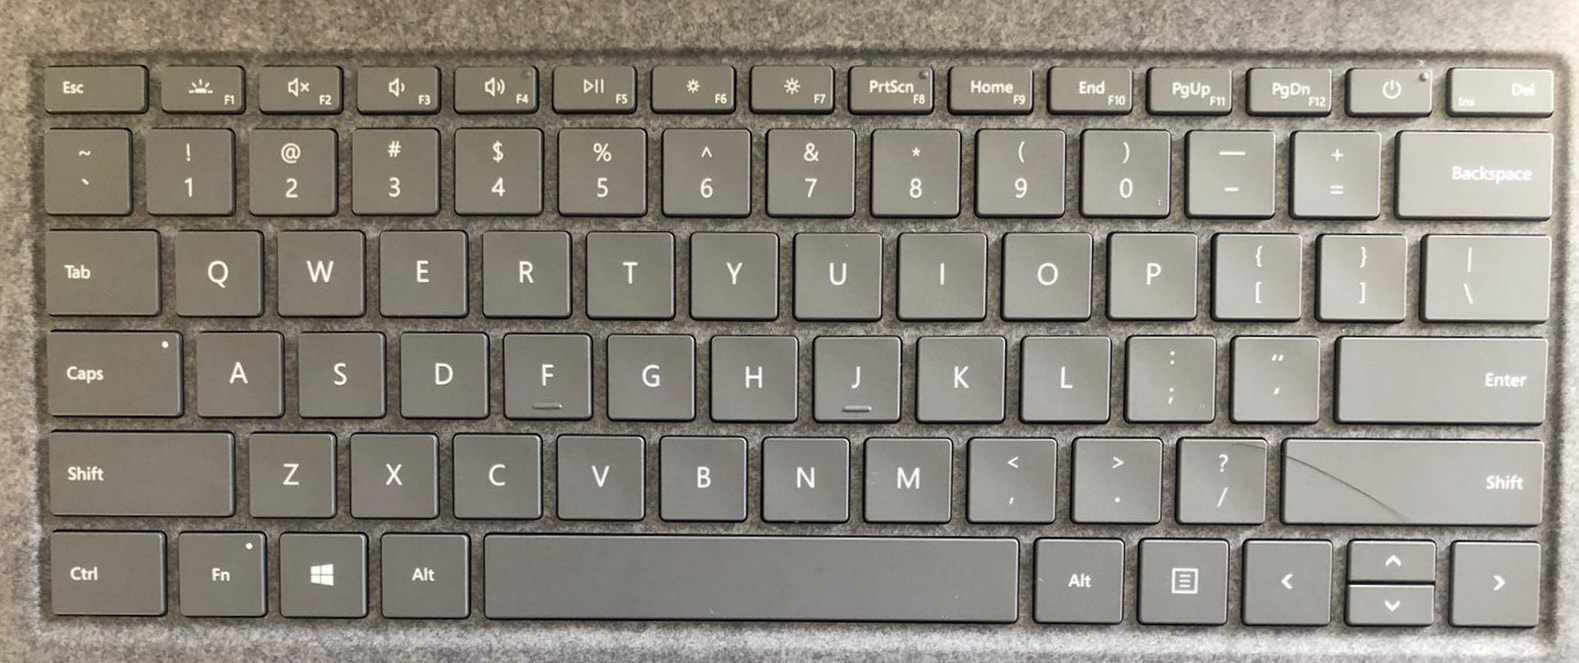 Keyboard layout for Surface Laptop 3.